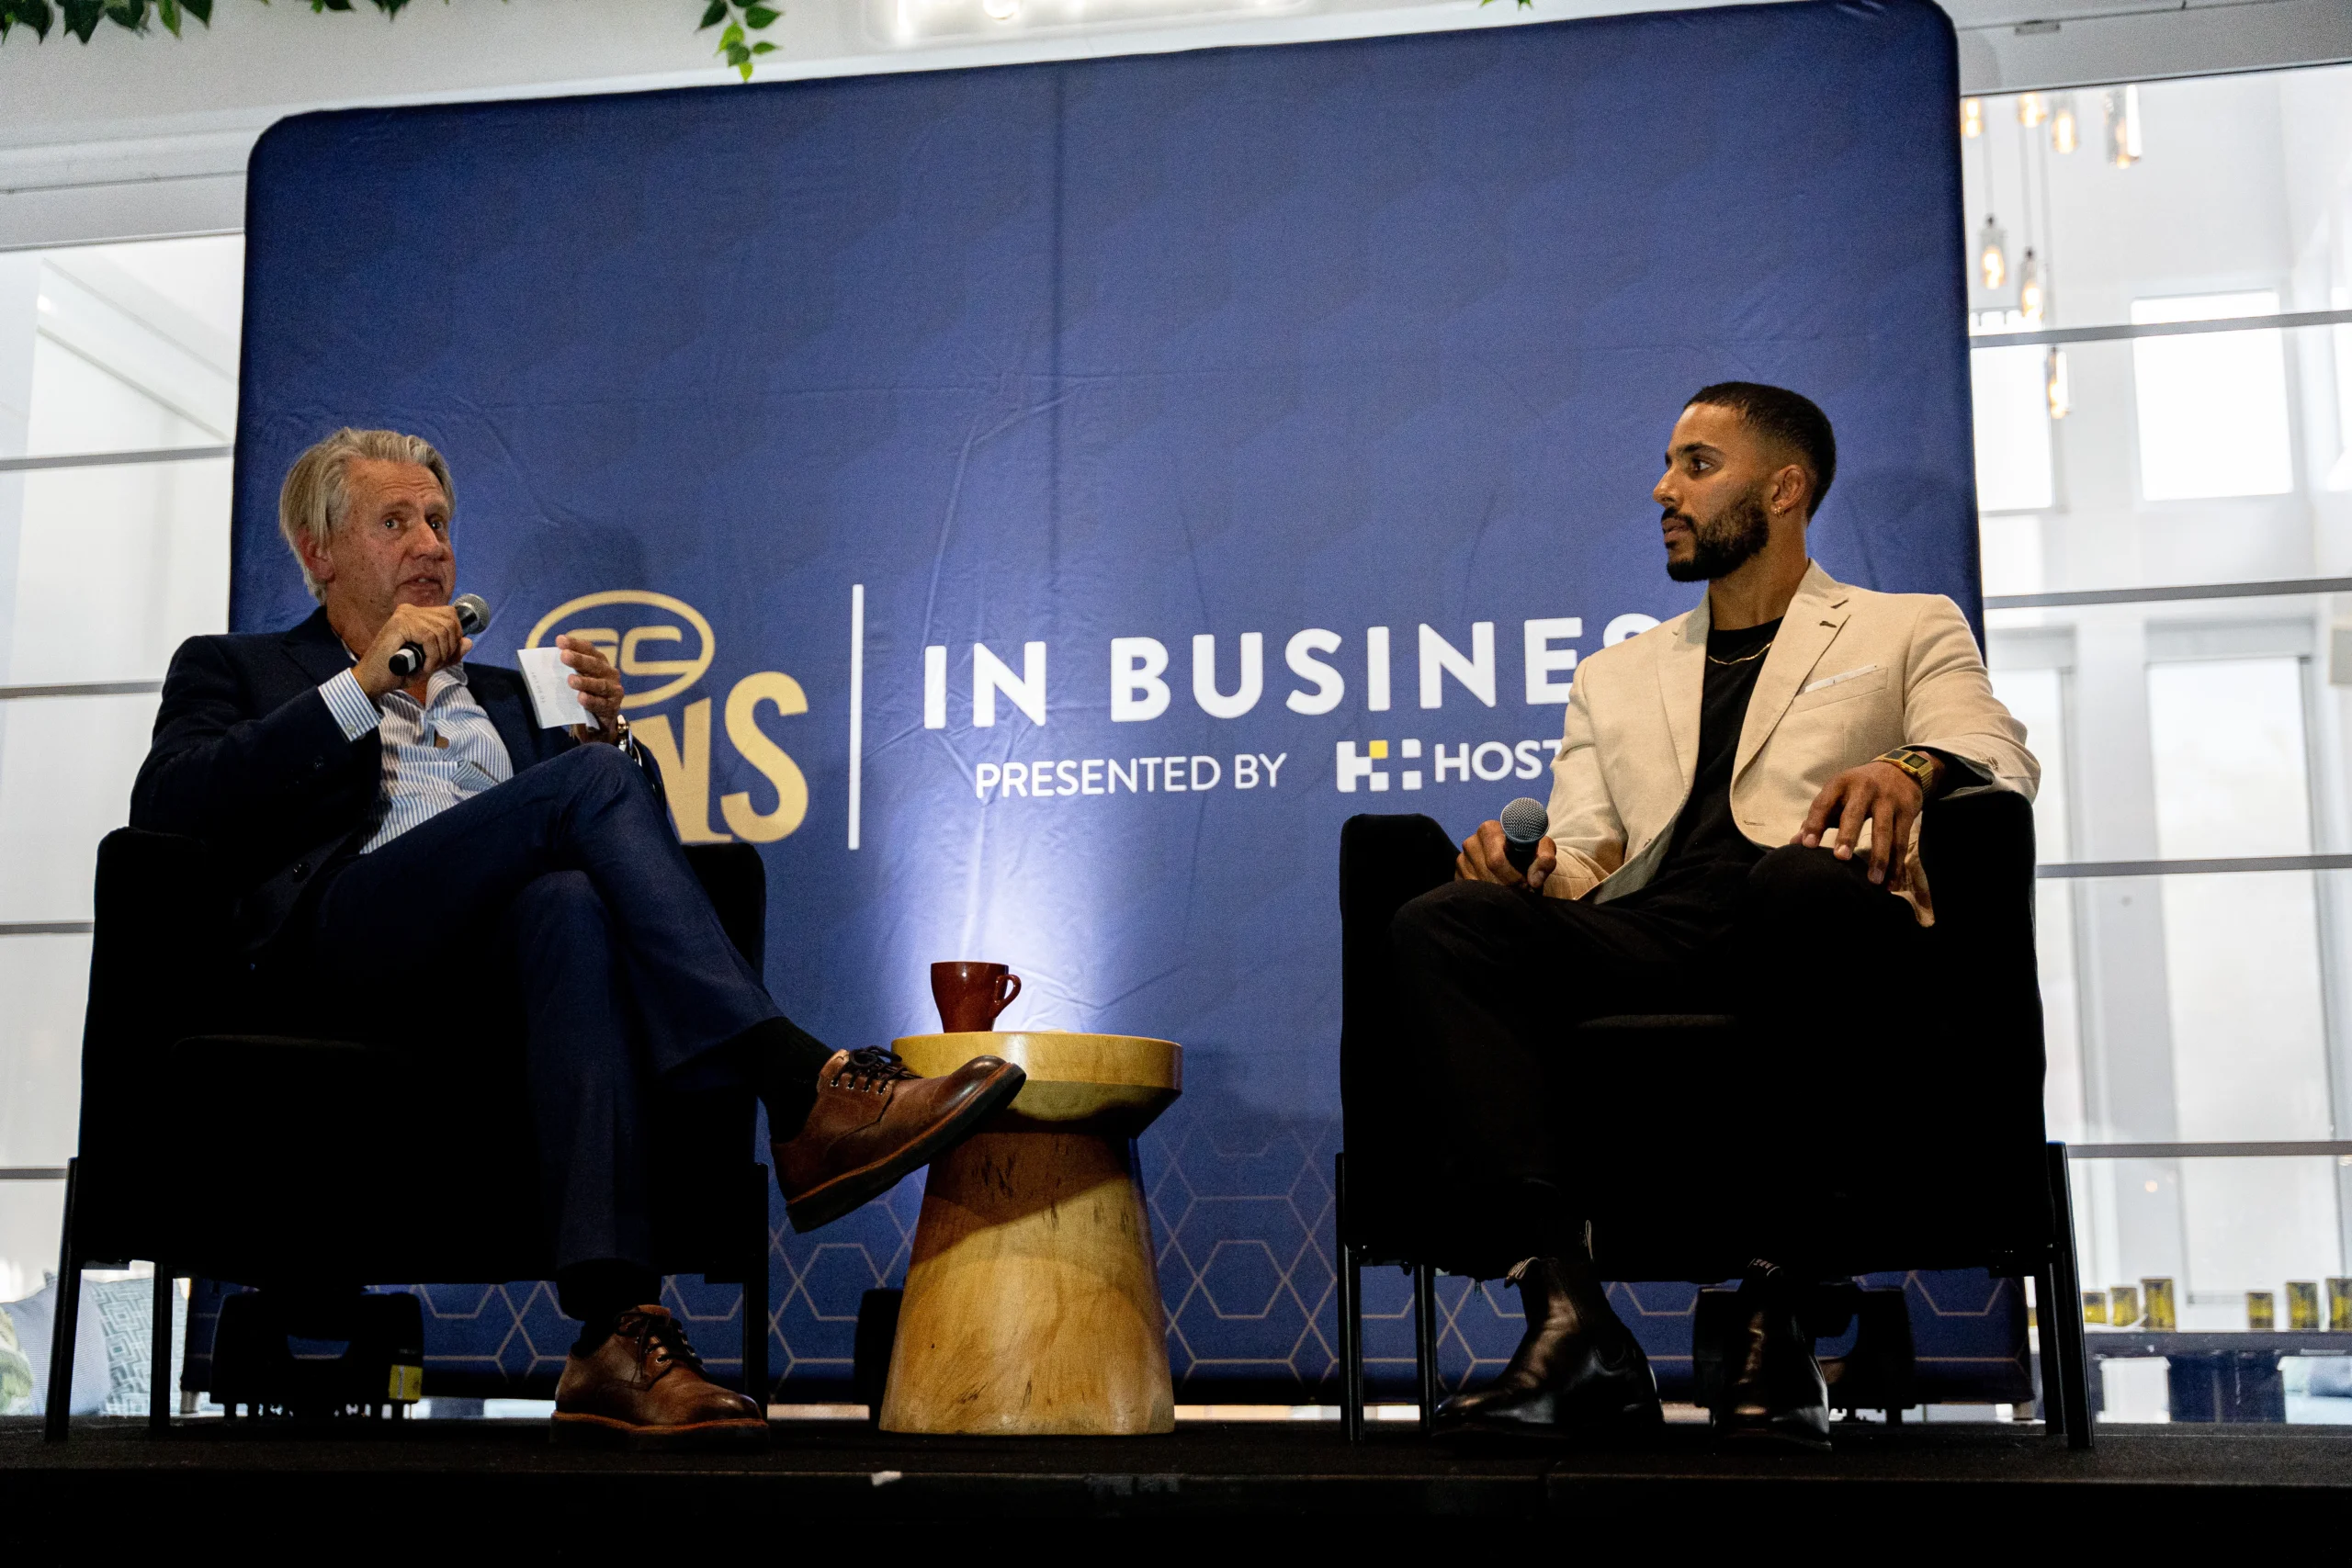 SUNS In Business Event